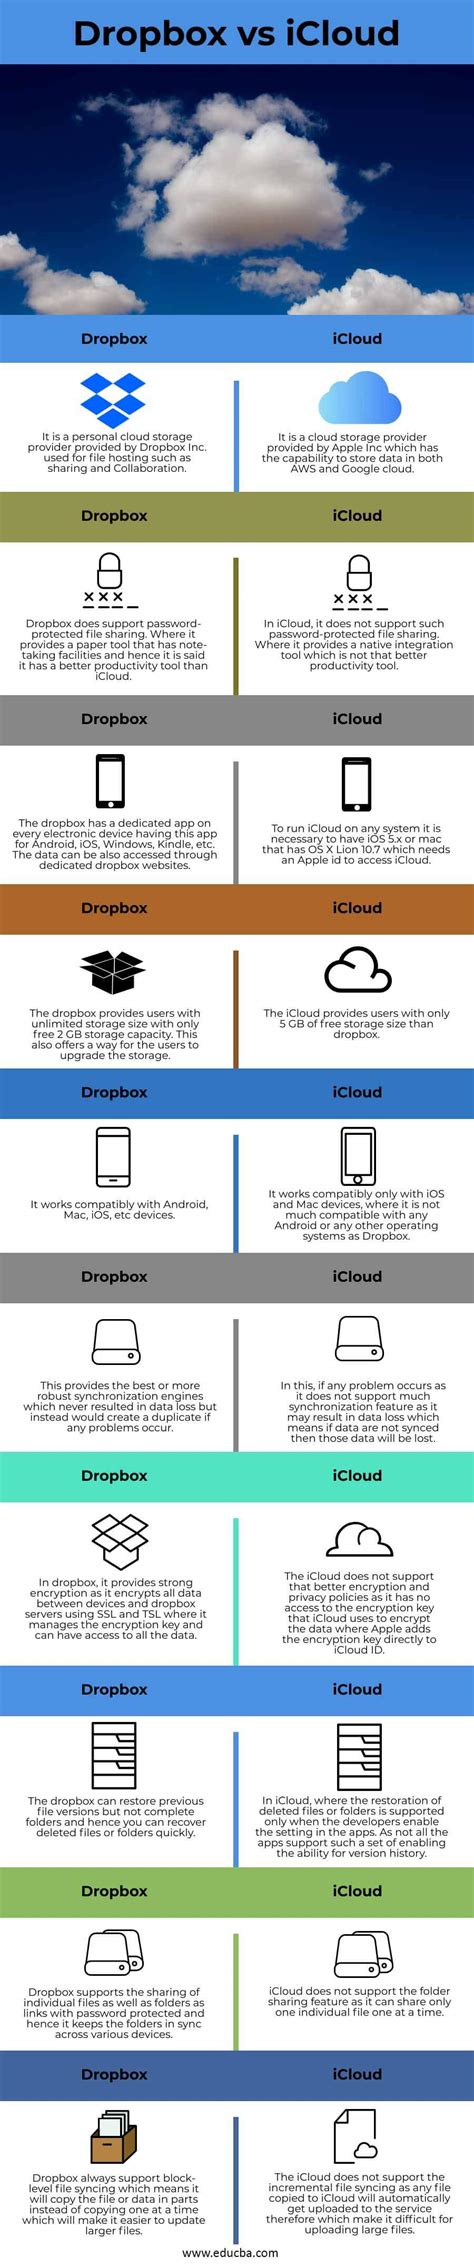 dropbox  icloud top  differences